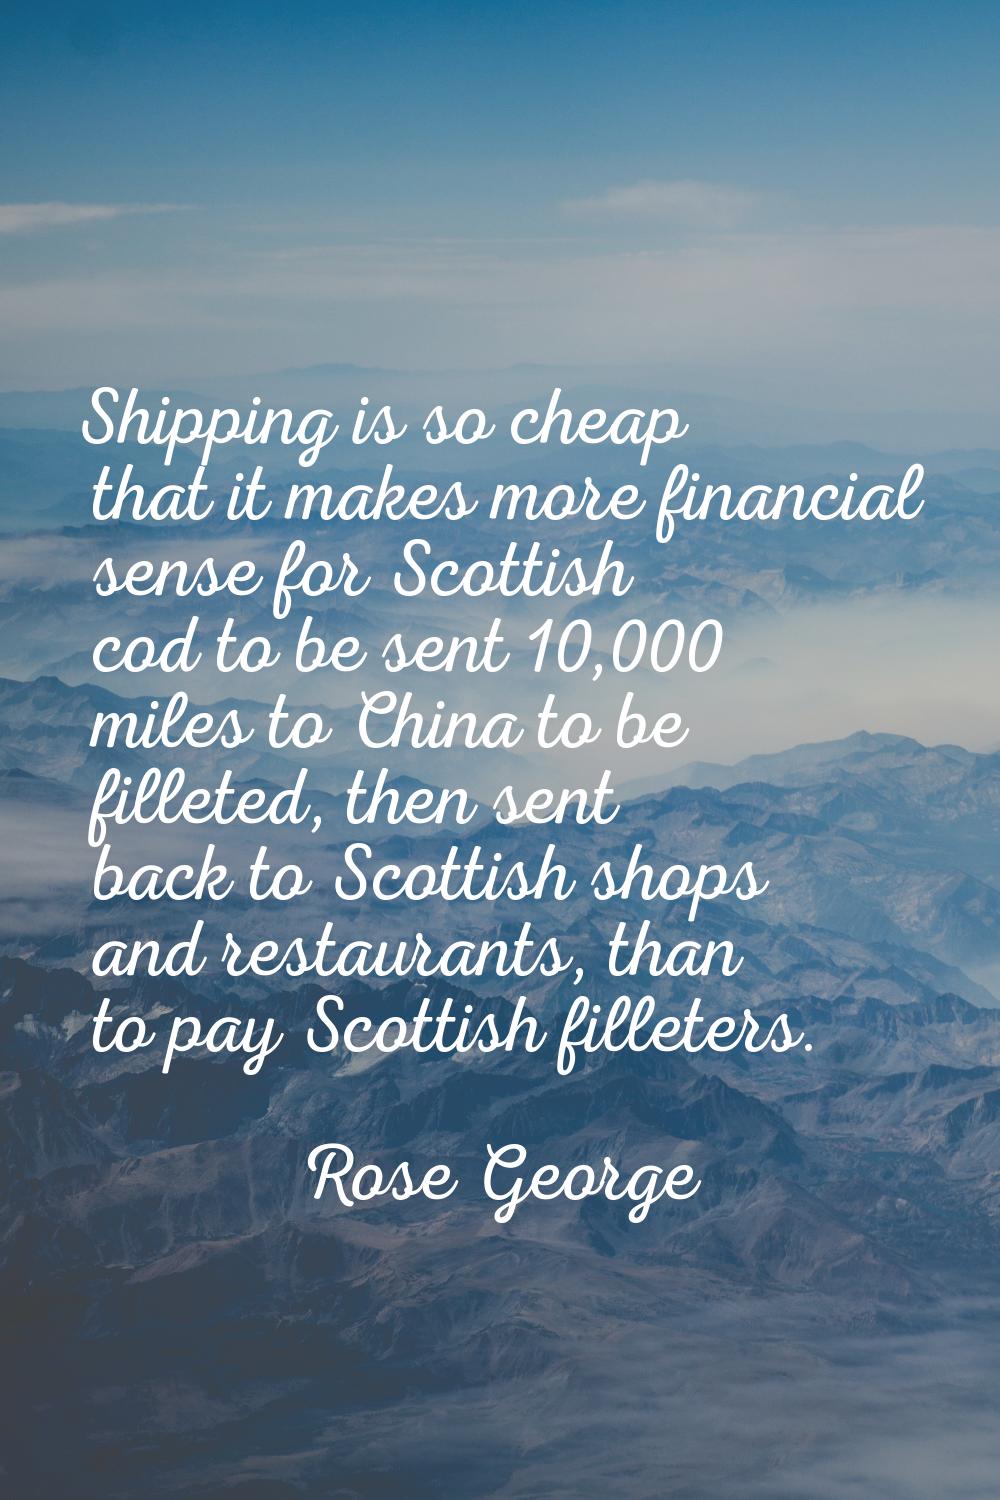 Shipping is so cheap that it makes more financial sense for Scottish cod to be sent 10,000 miles to